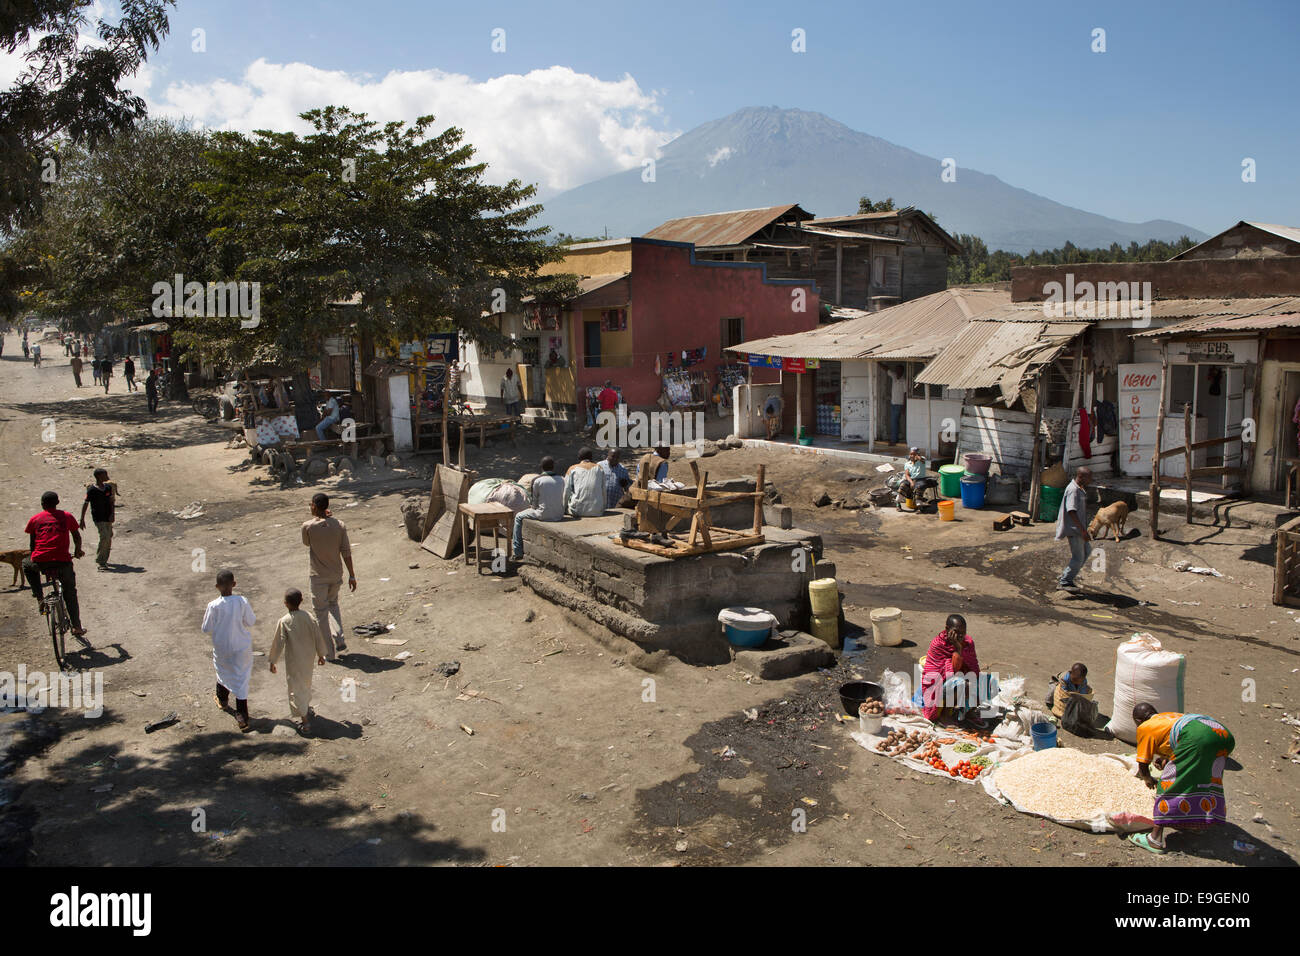 Street in Arusha, Tanzania, with Mt Meru in background - East Africa. Stock Photo